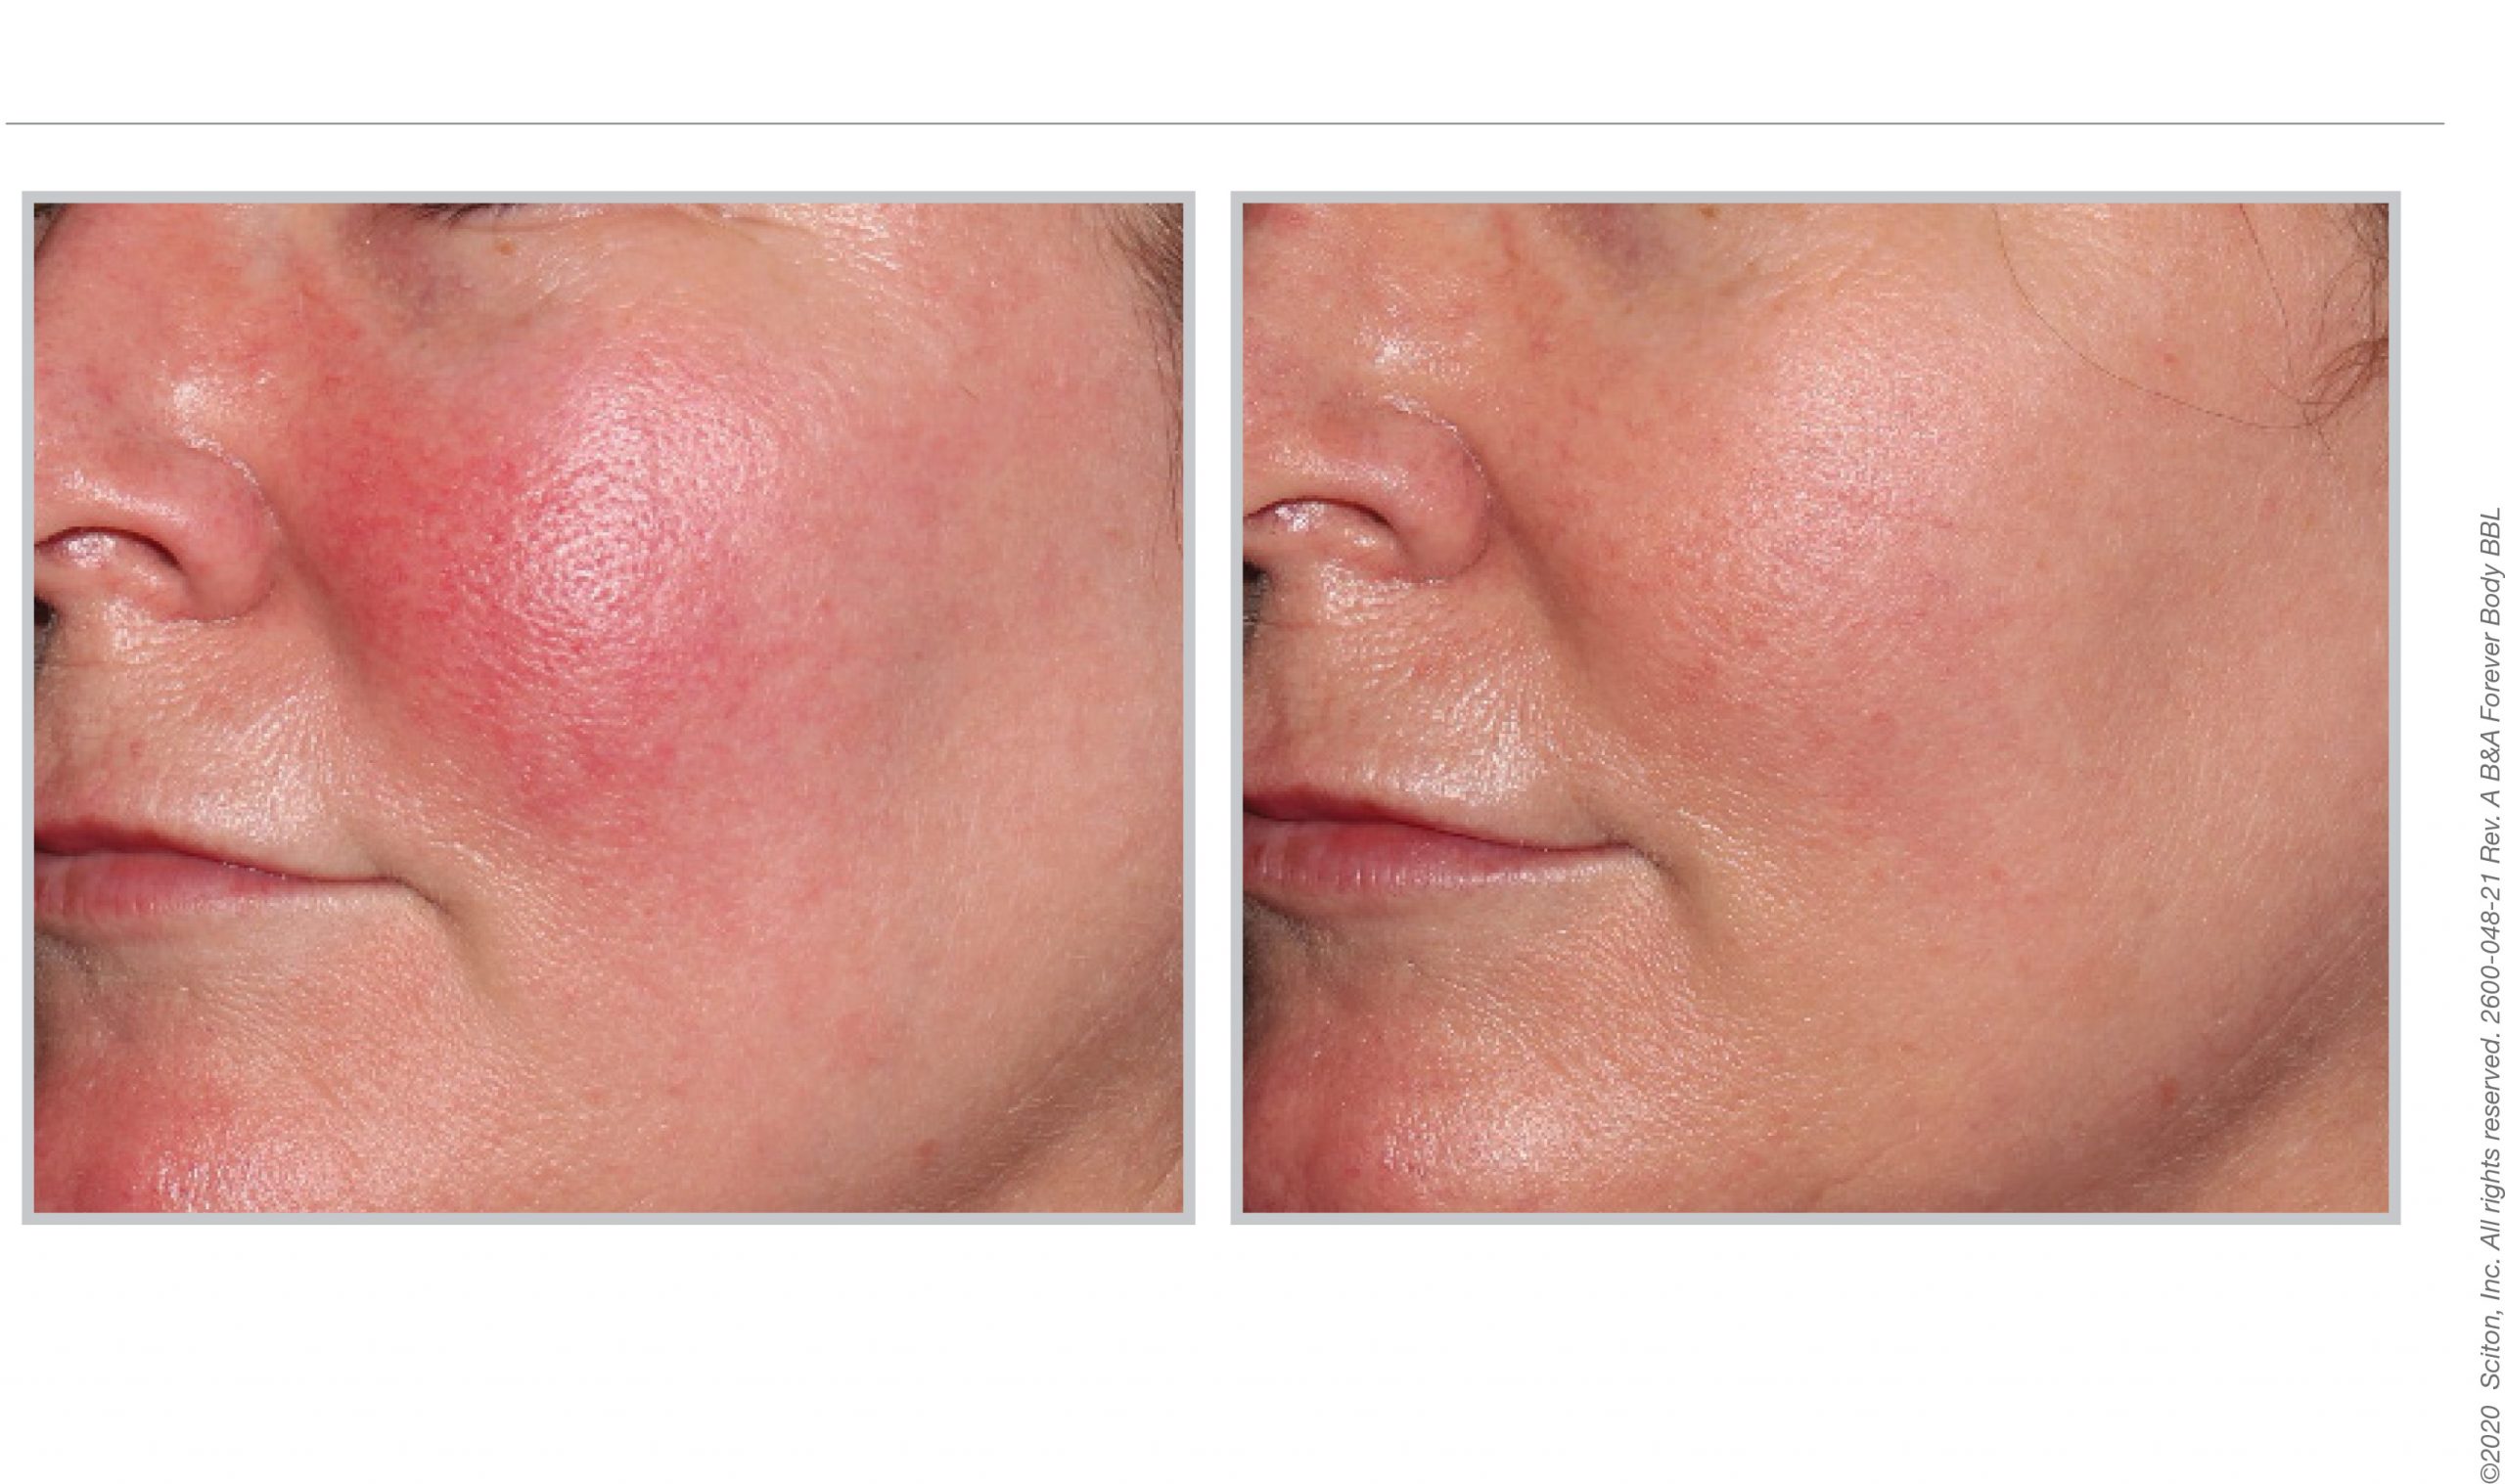 BBL Hero patient before and after treatment 01, Infinity Skin Clinic Sydney